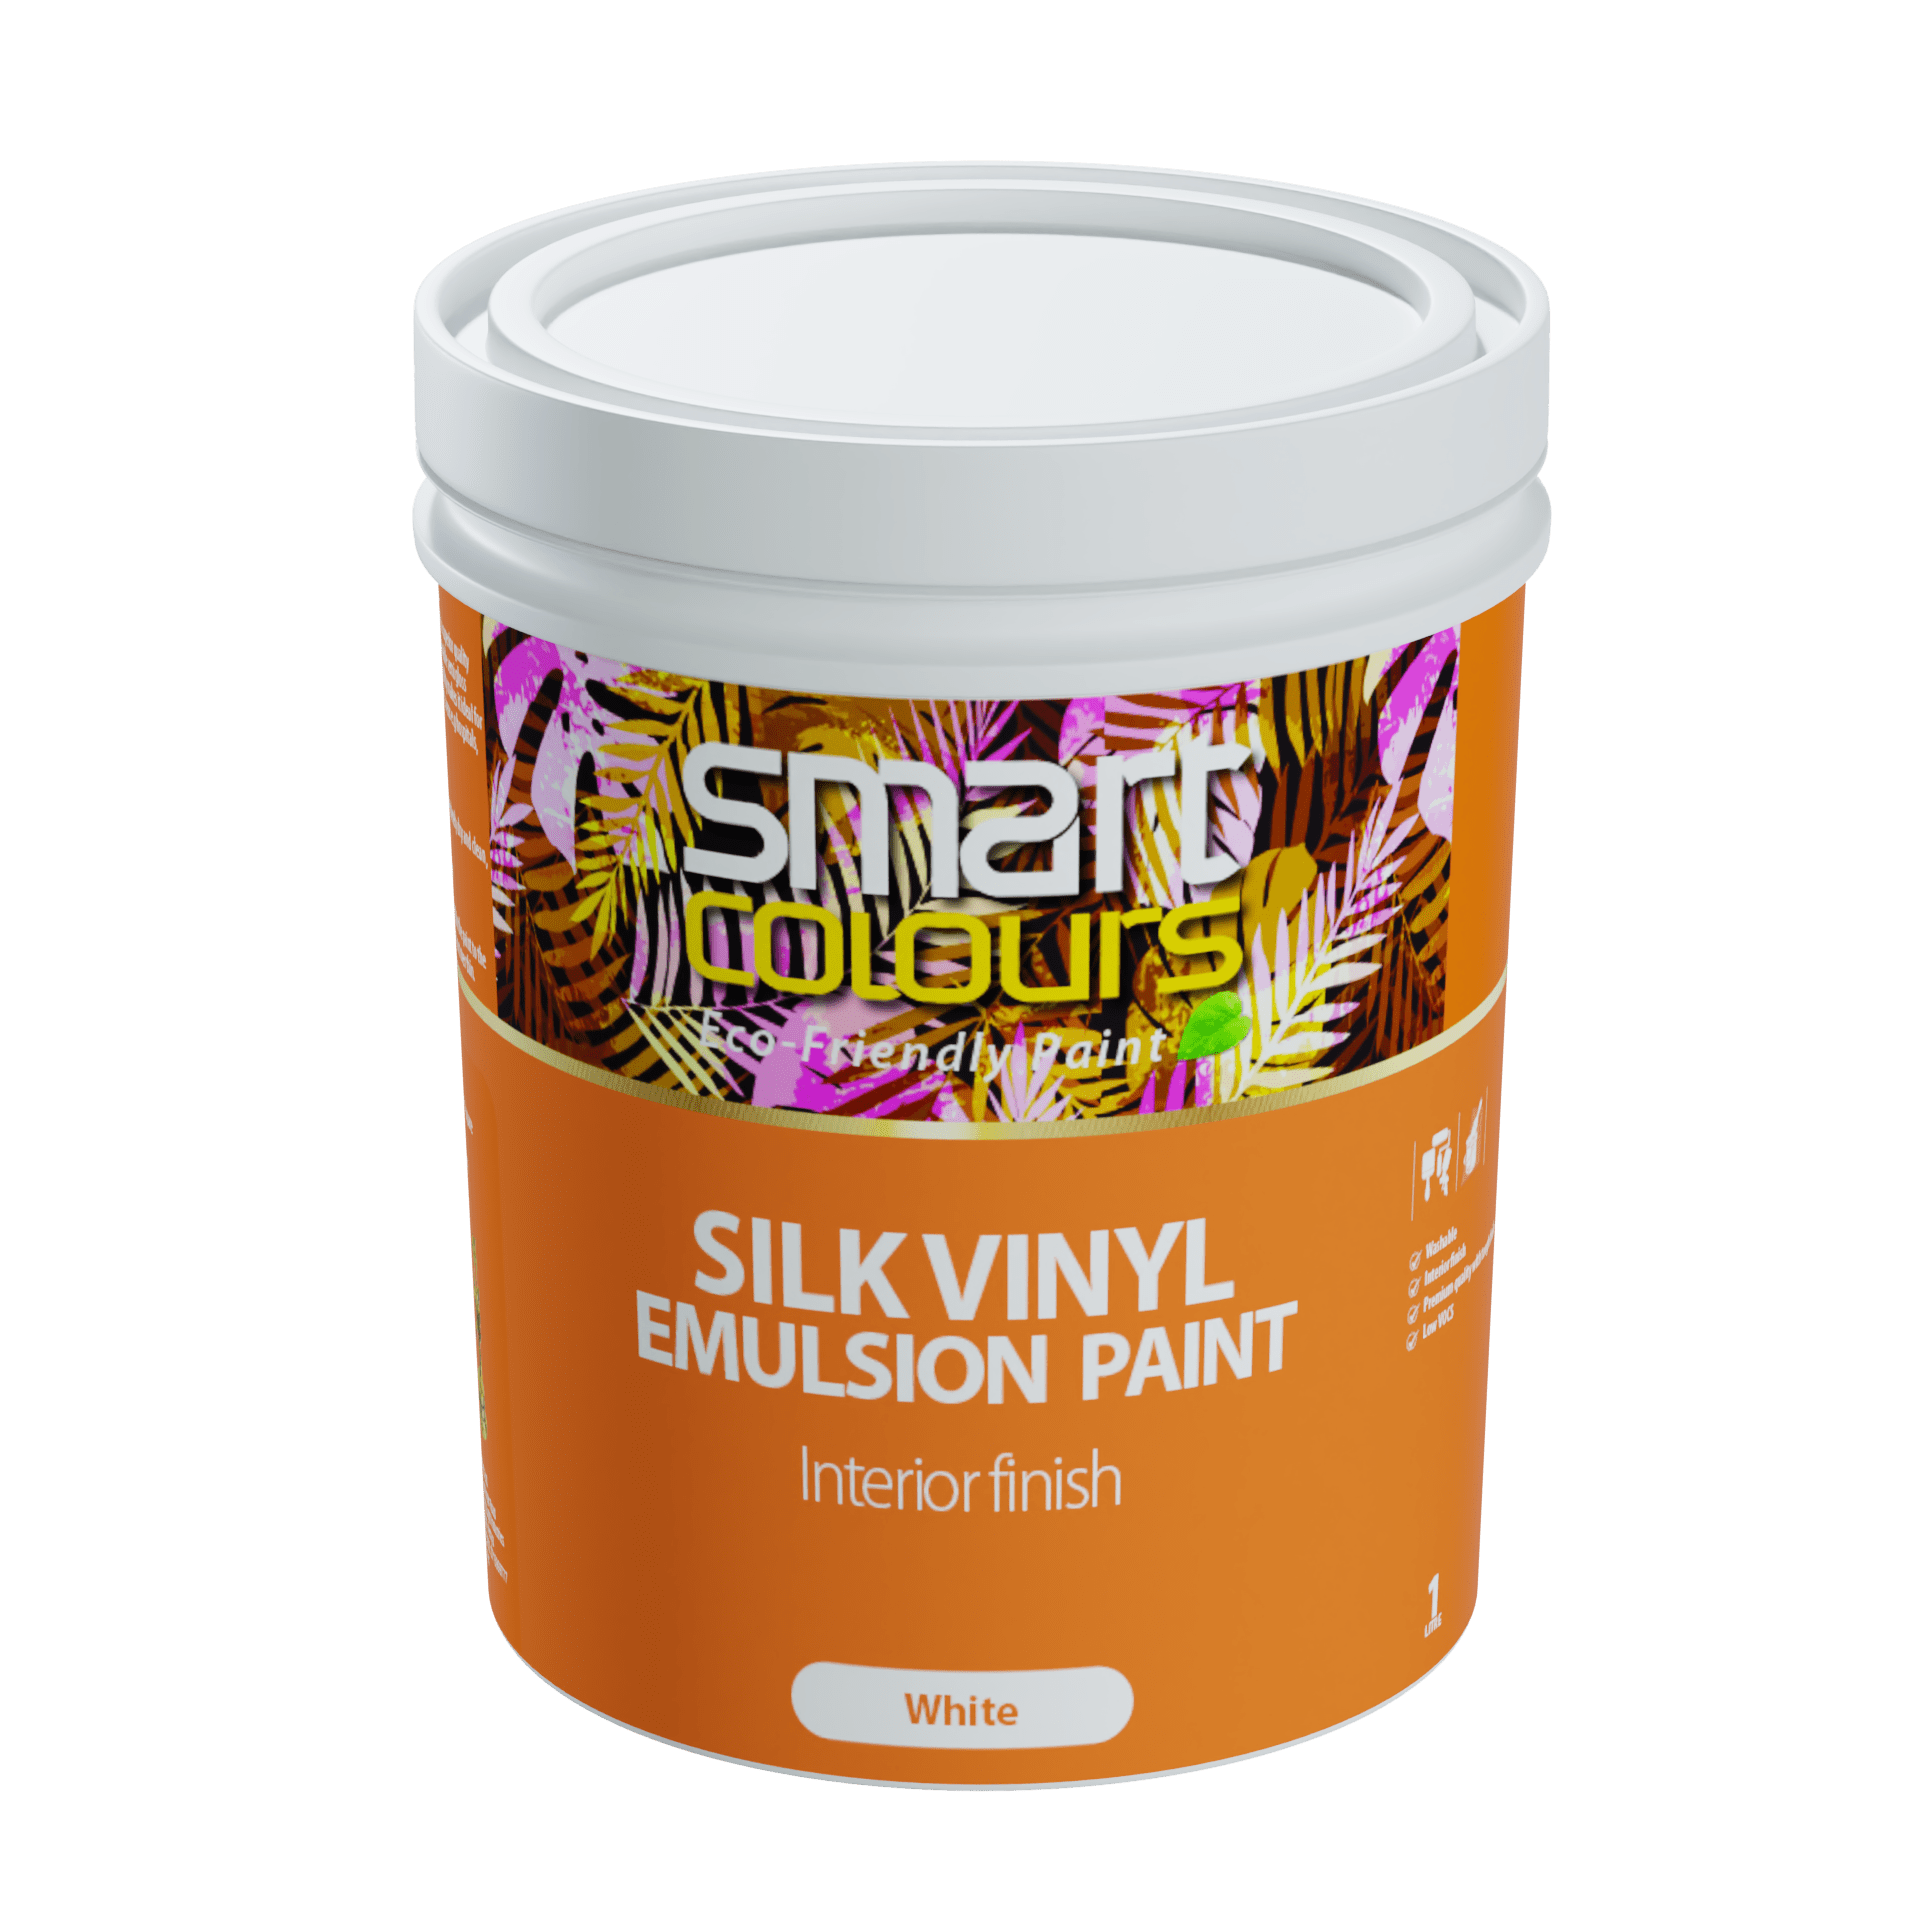 Most Affordable Silk Paint, Best Silk Paint in the Market, Quality Silk, Most Effective Silk Paint